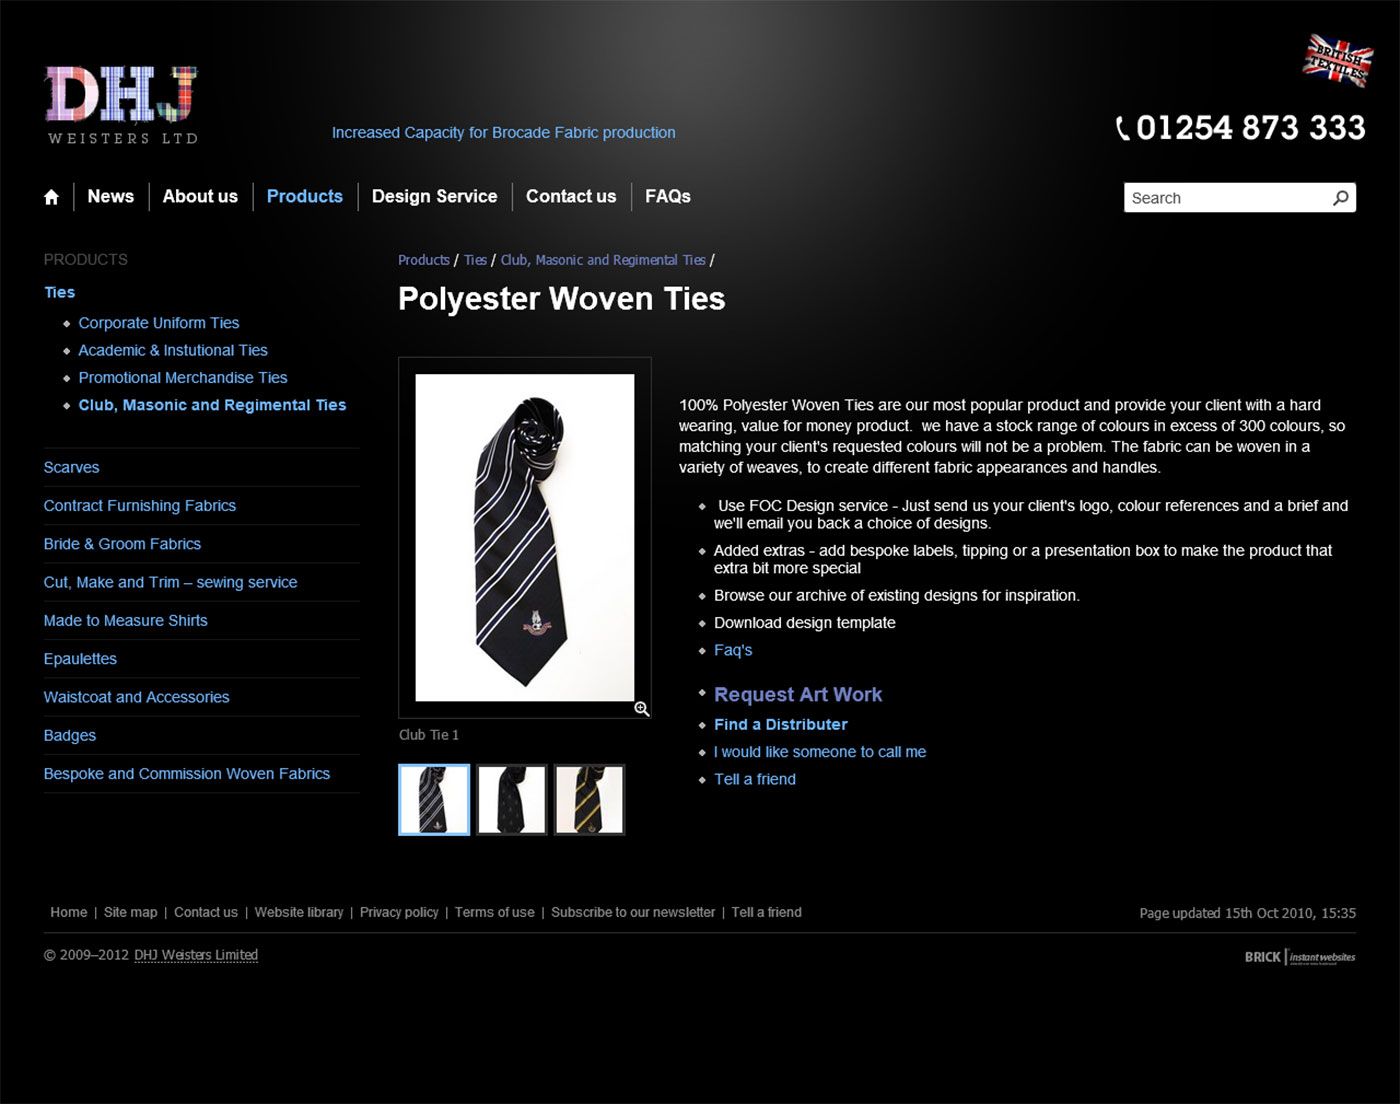 DHJ Weisters Limited (2012) Product-page